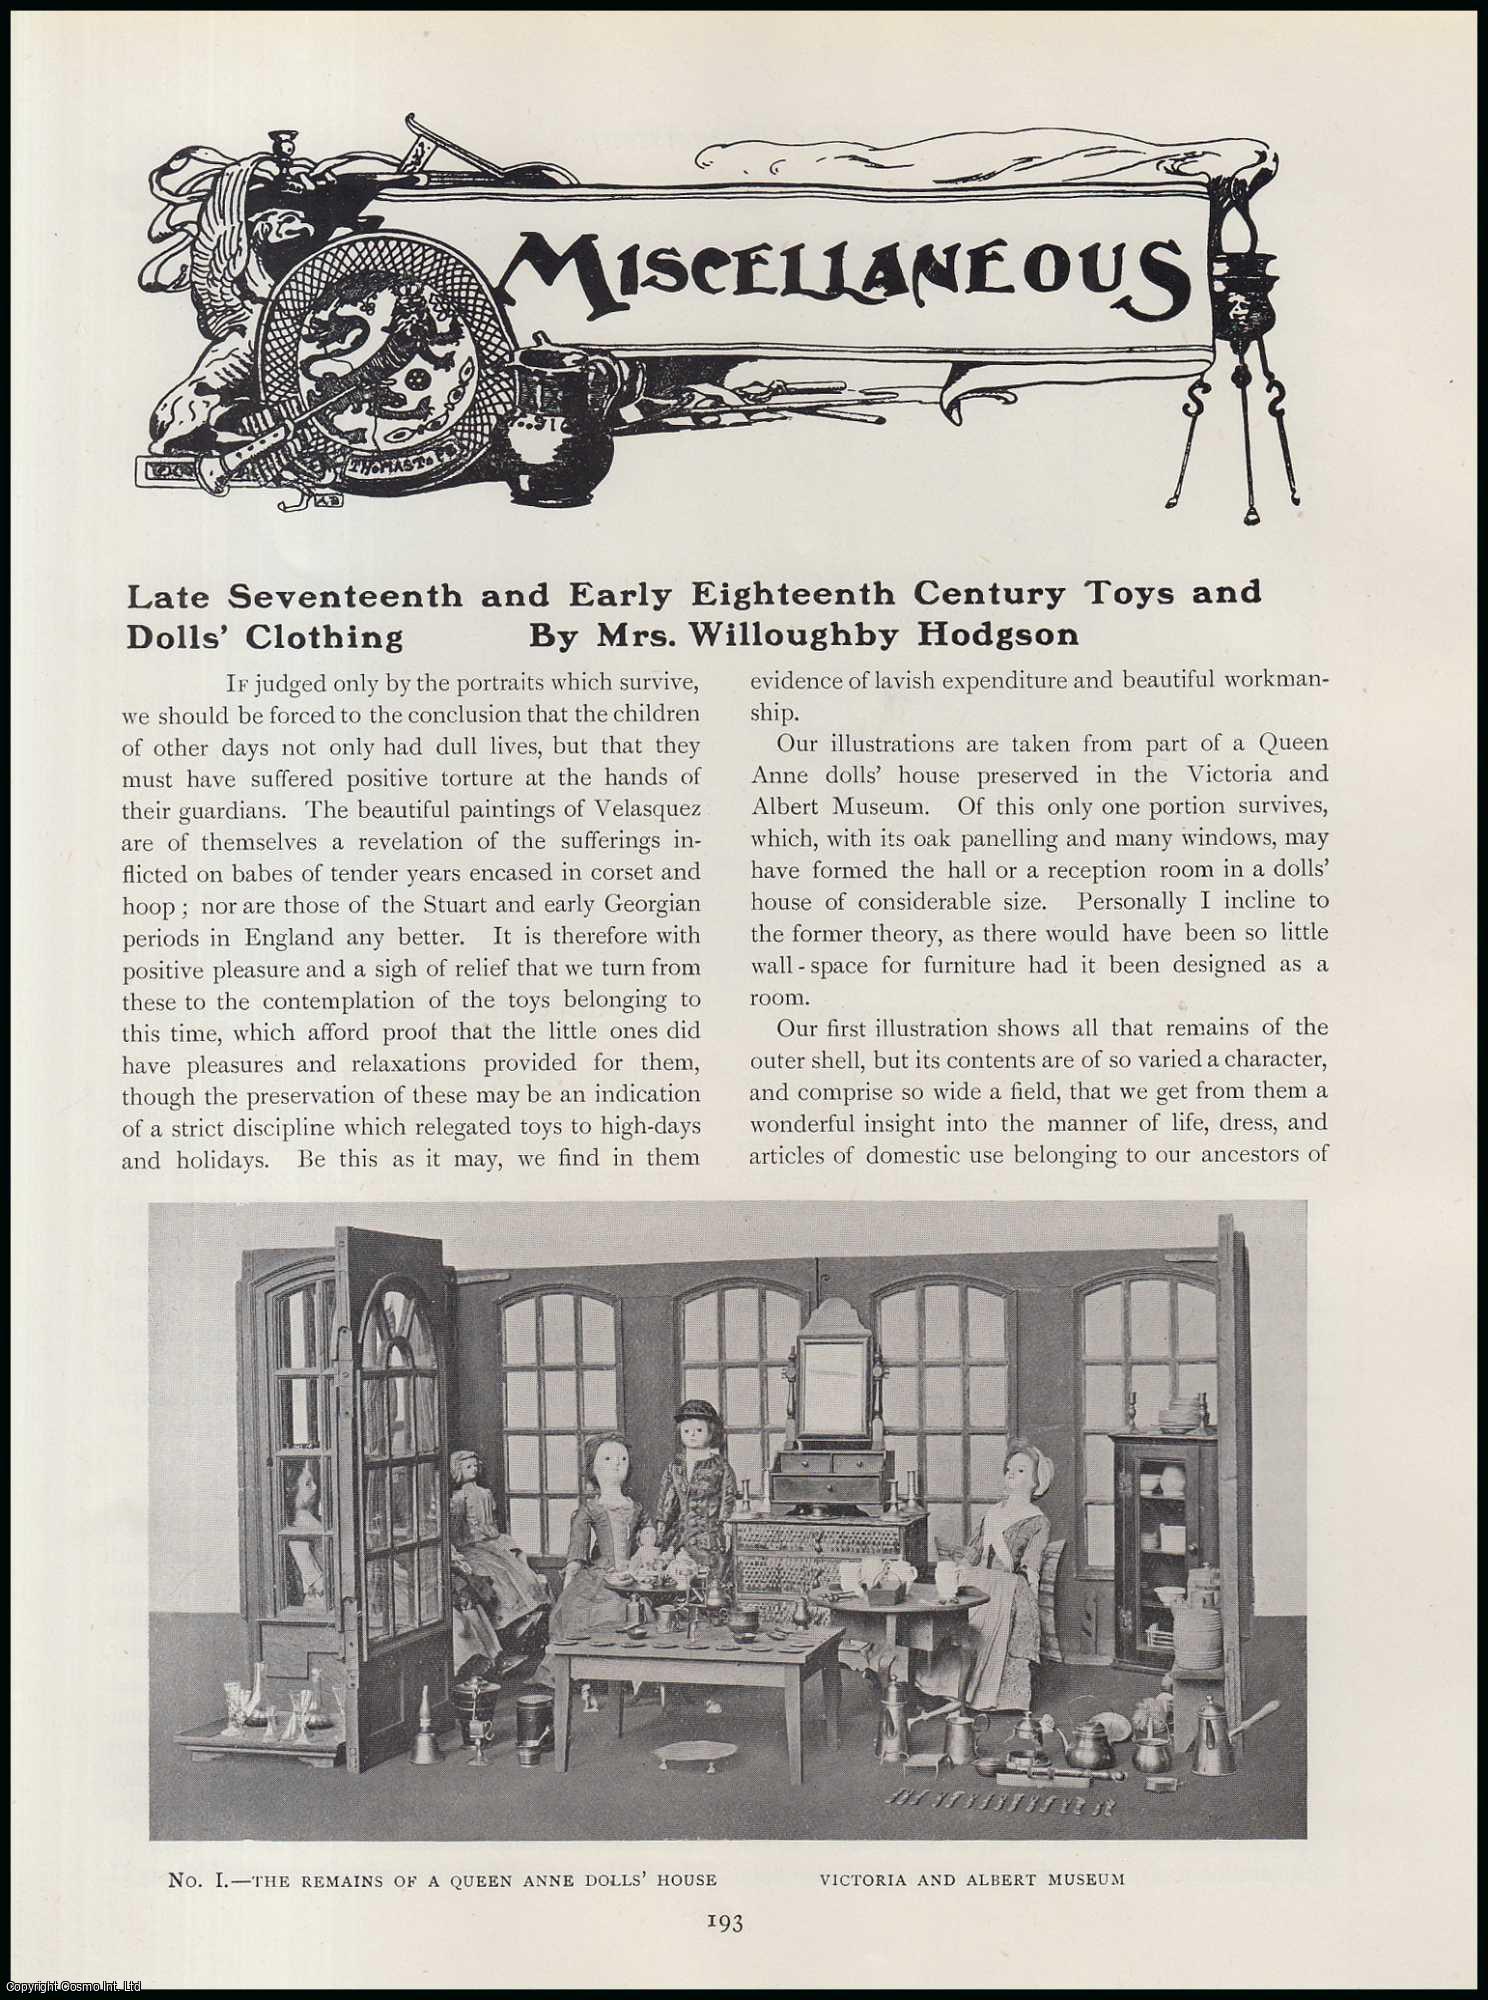 Mrs. Willoughby Hodgson - Late Seventeenth & Early Eighteenth Century Toys & Dolls Clothing. An original article from The Connoisseur, 1917.